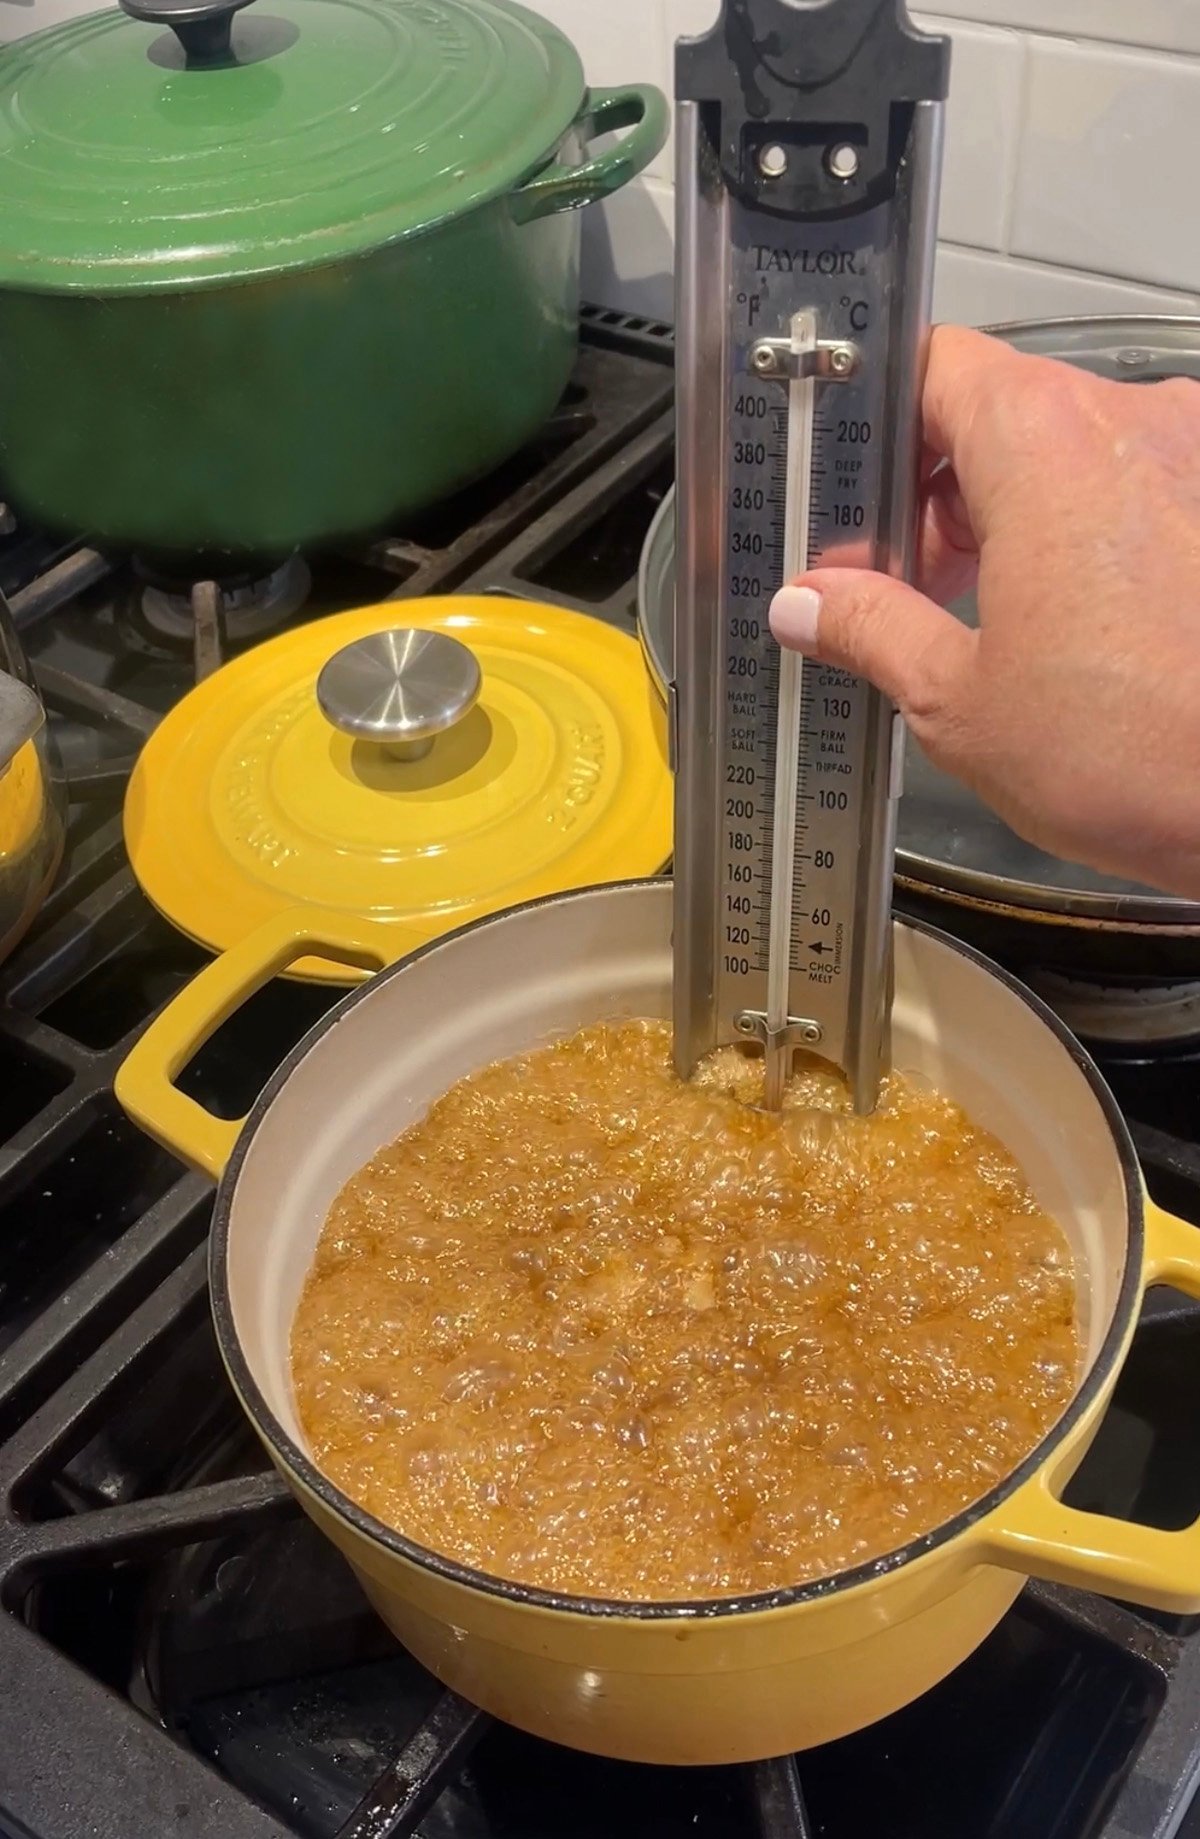 Boiling toffee candy on the stove.